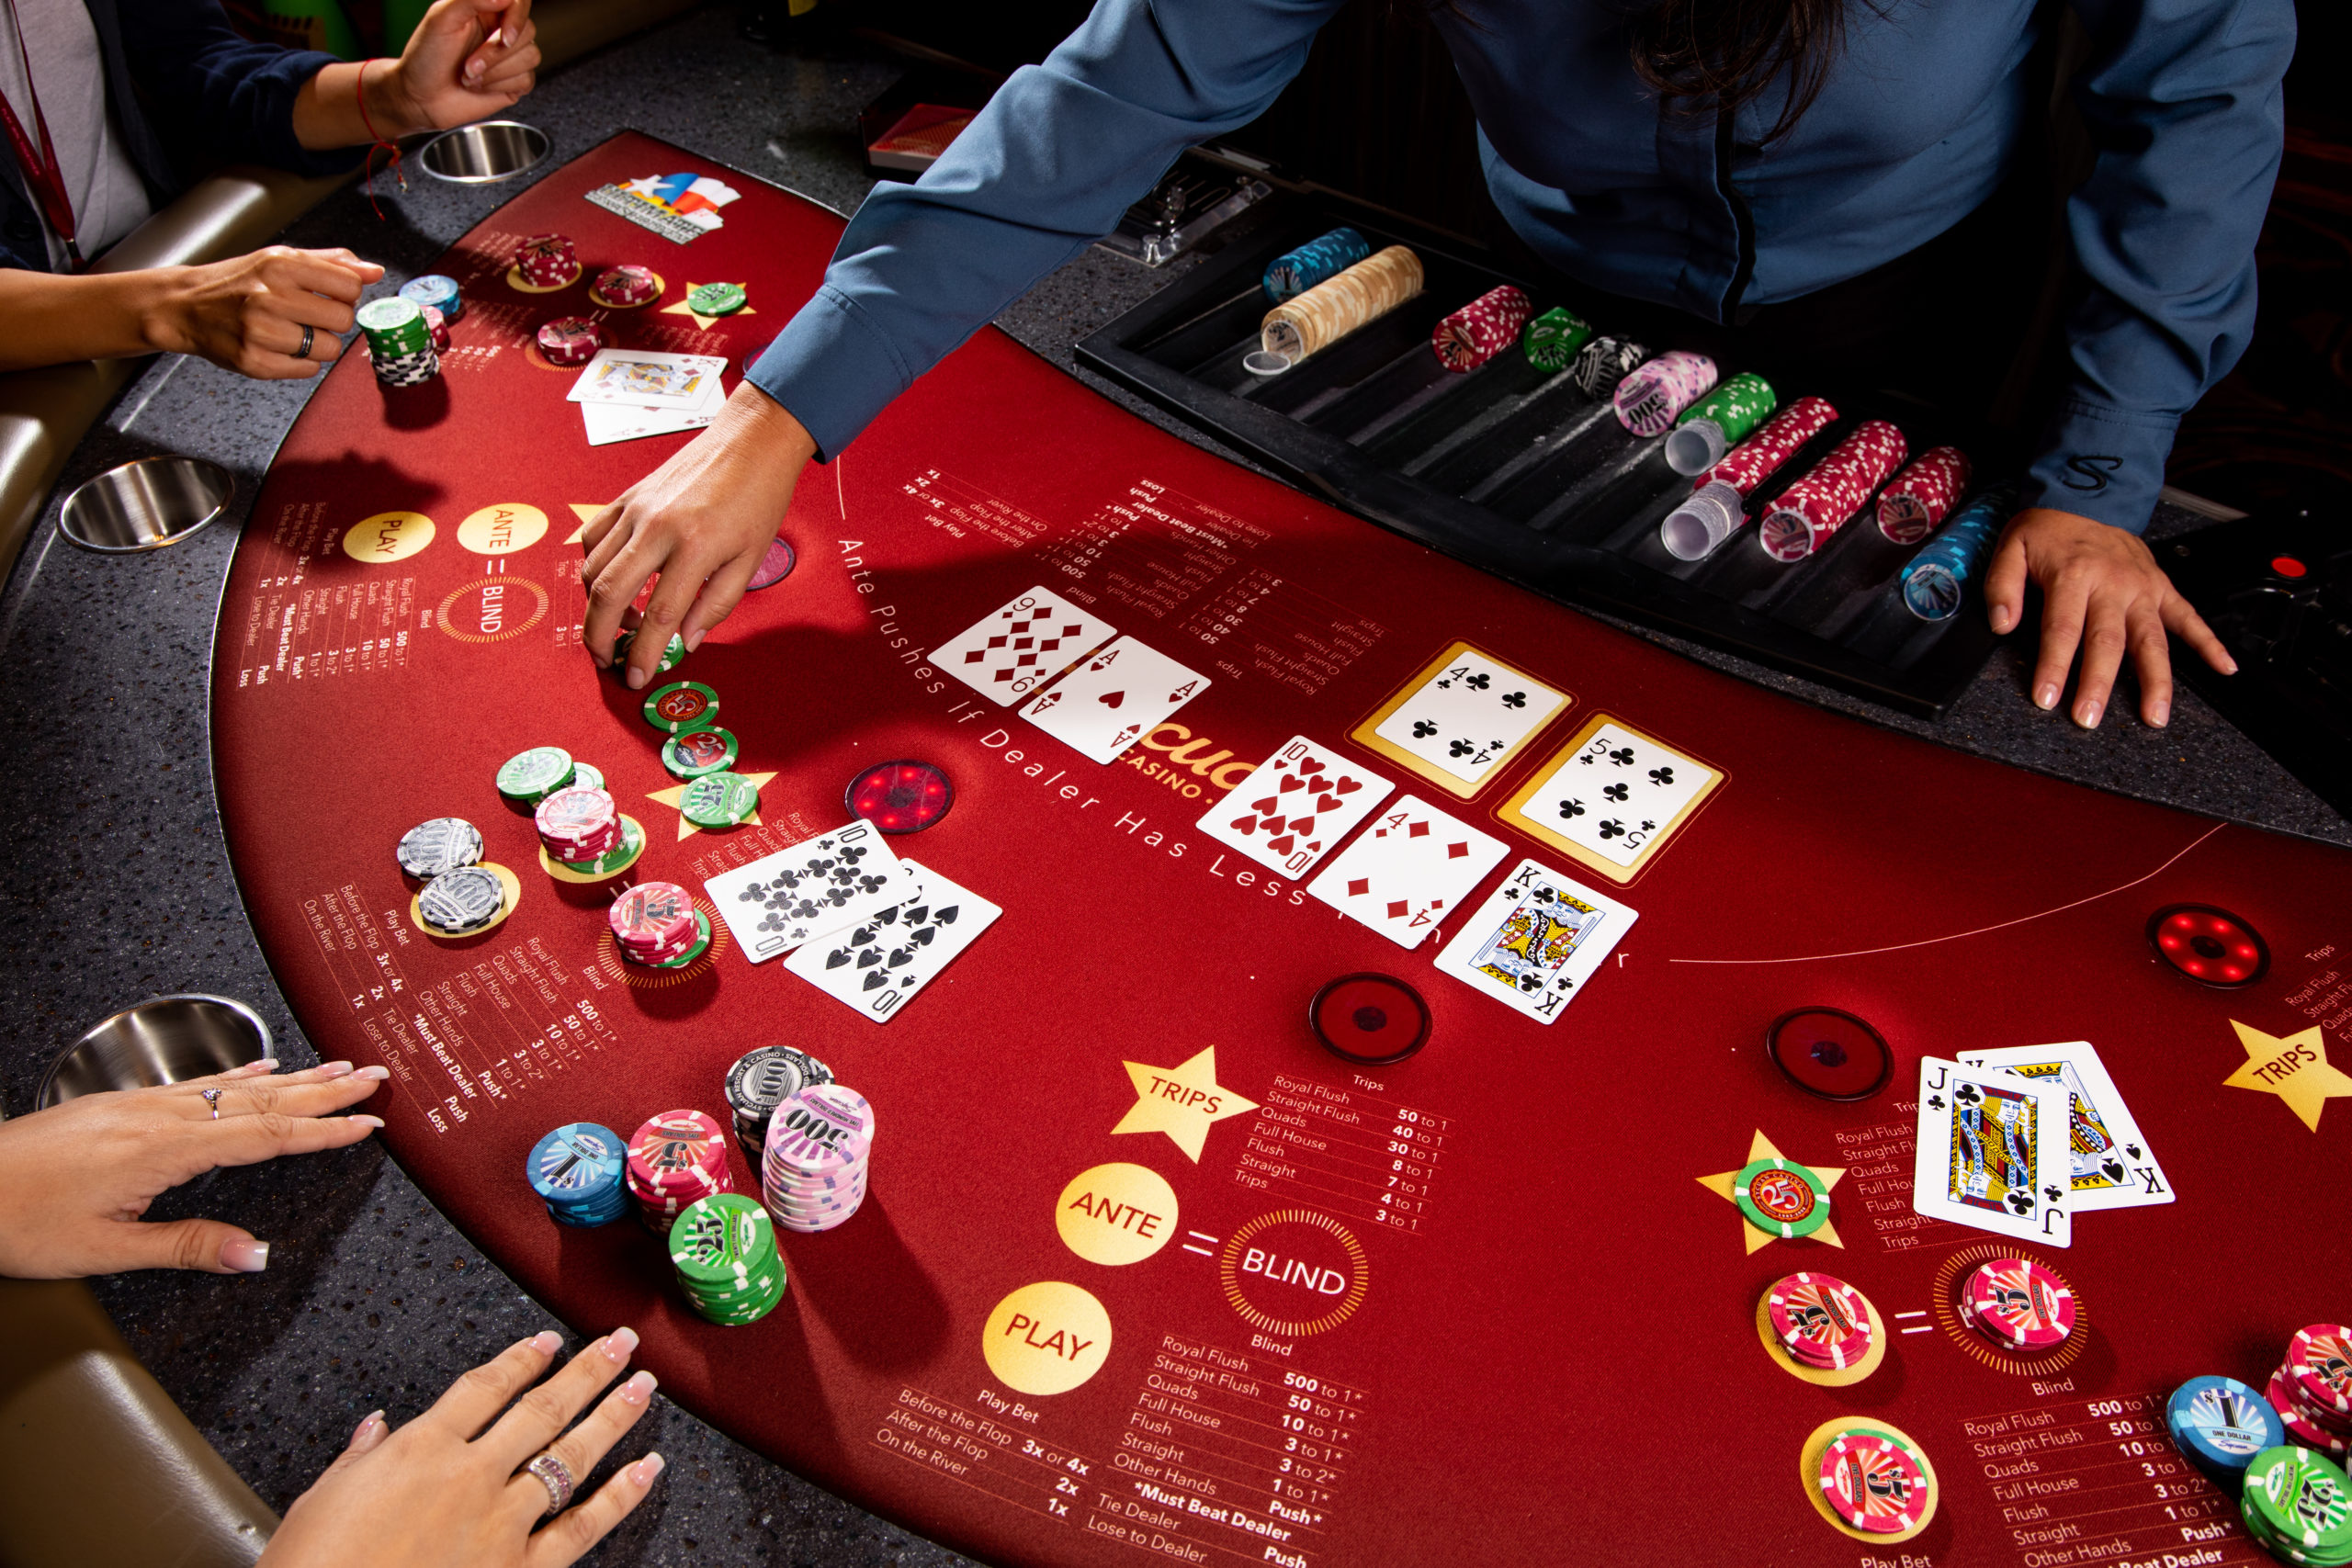 What are the rules regarding poker games?